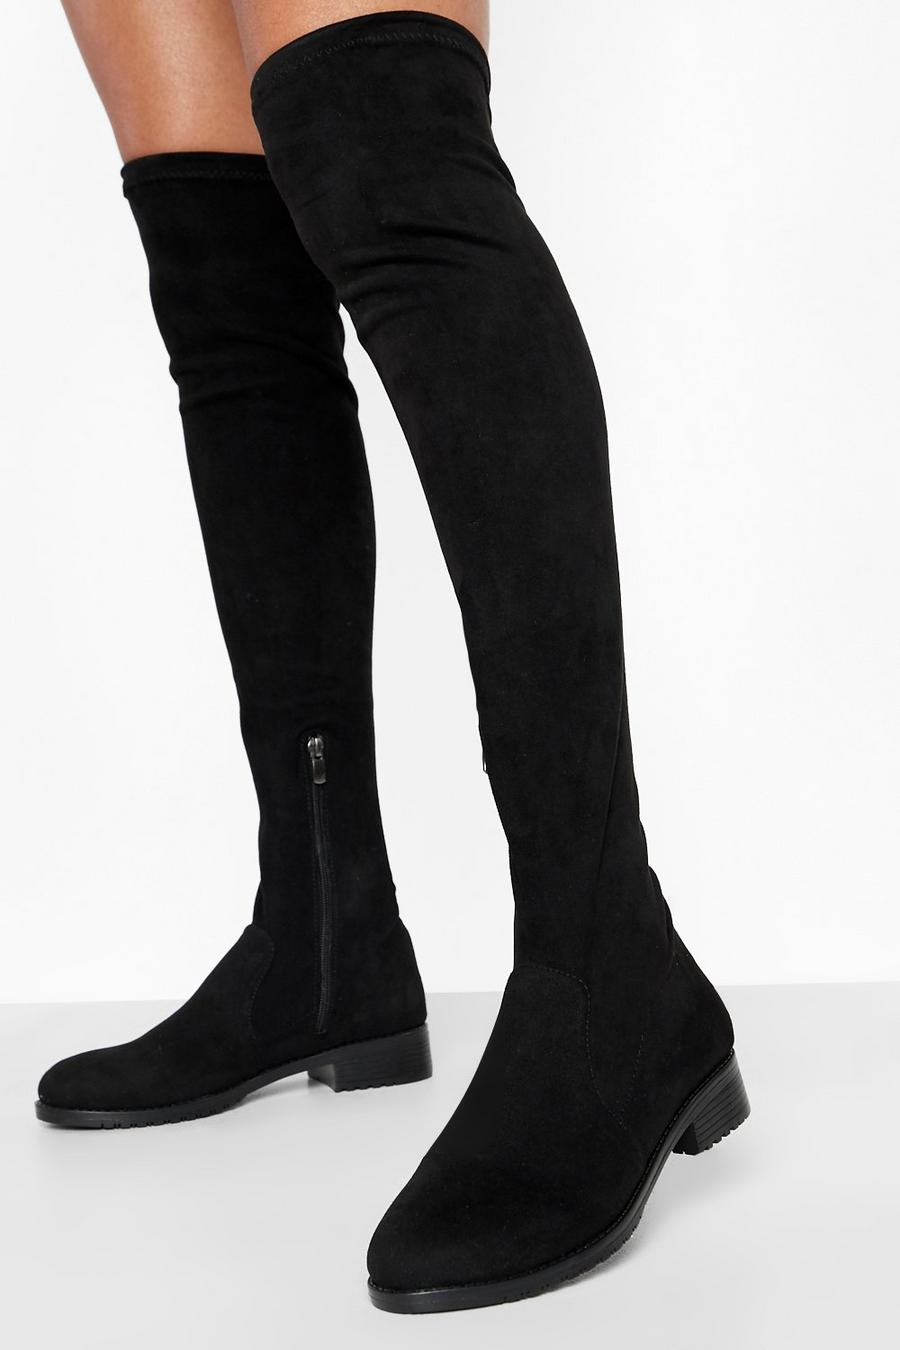 Black Flat Over The Knee Thigh High Boot